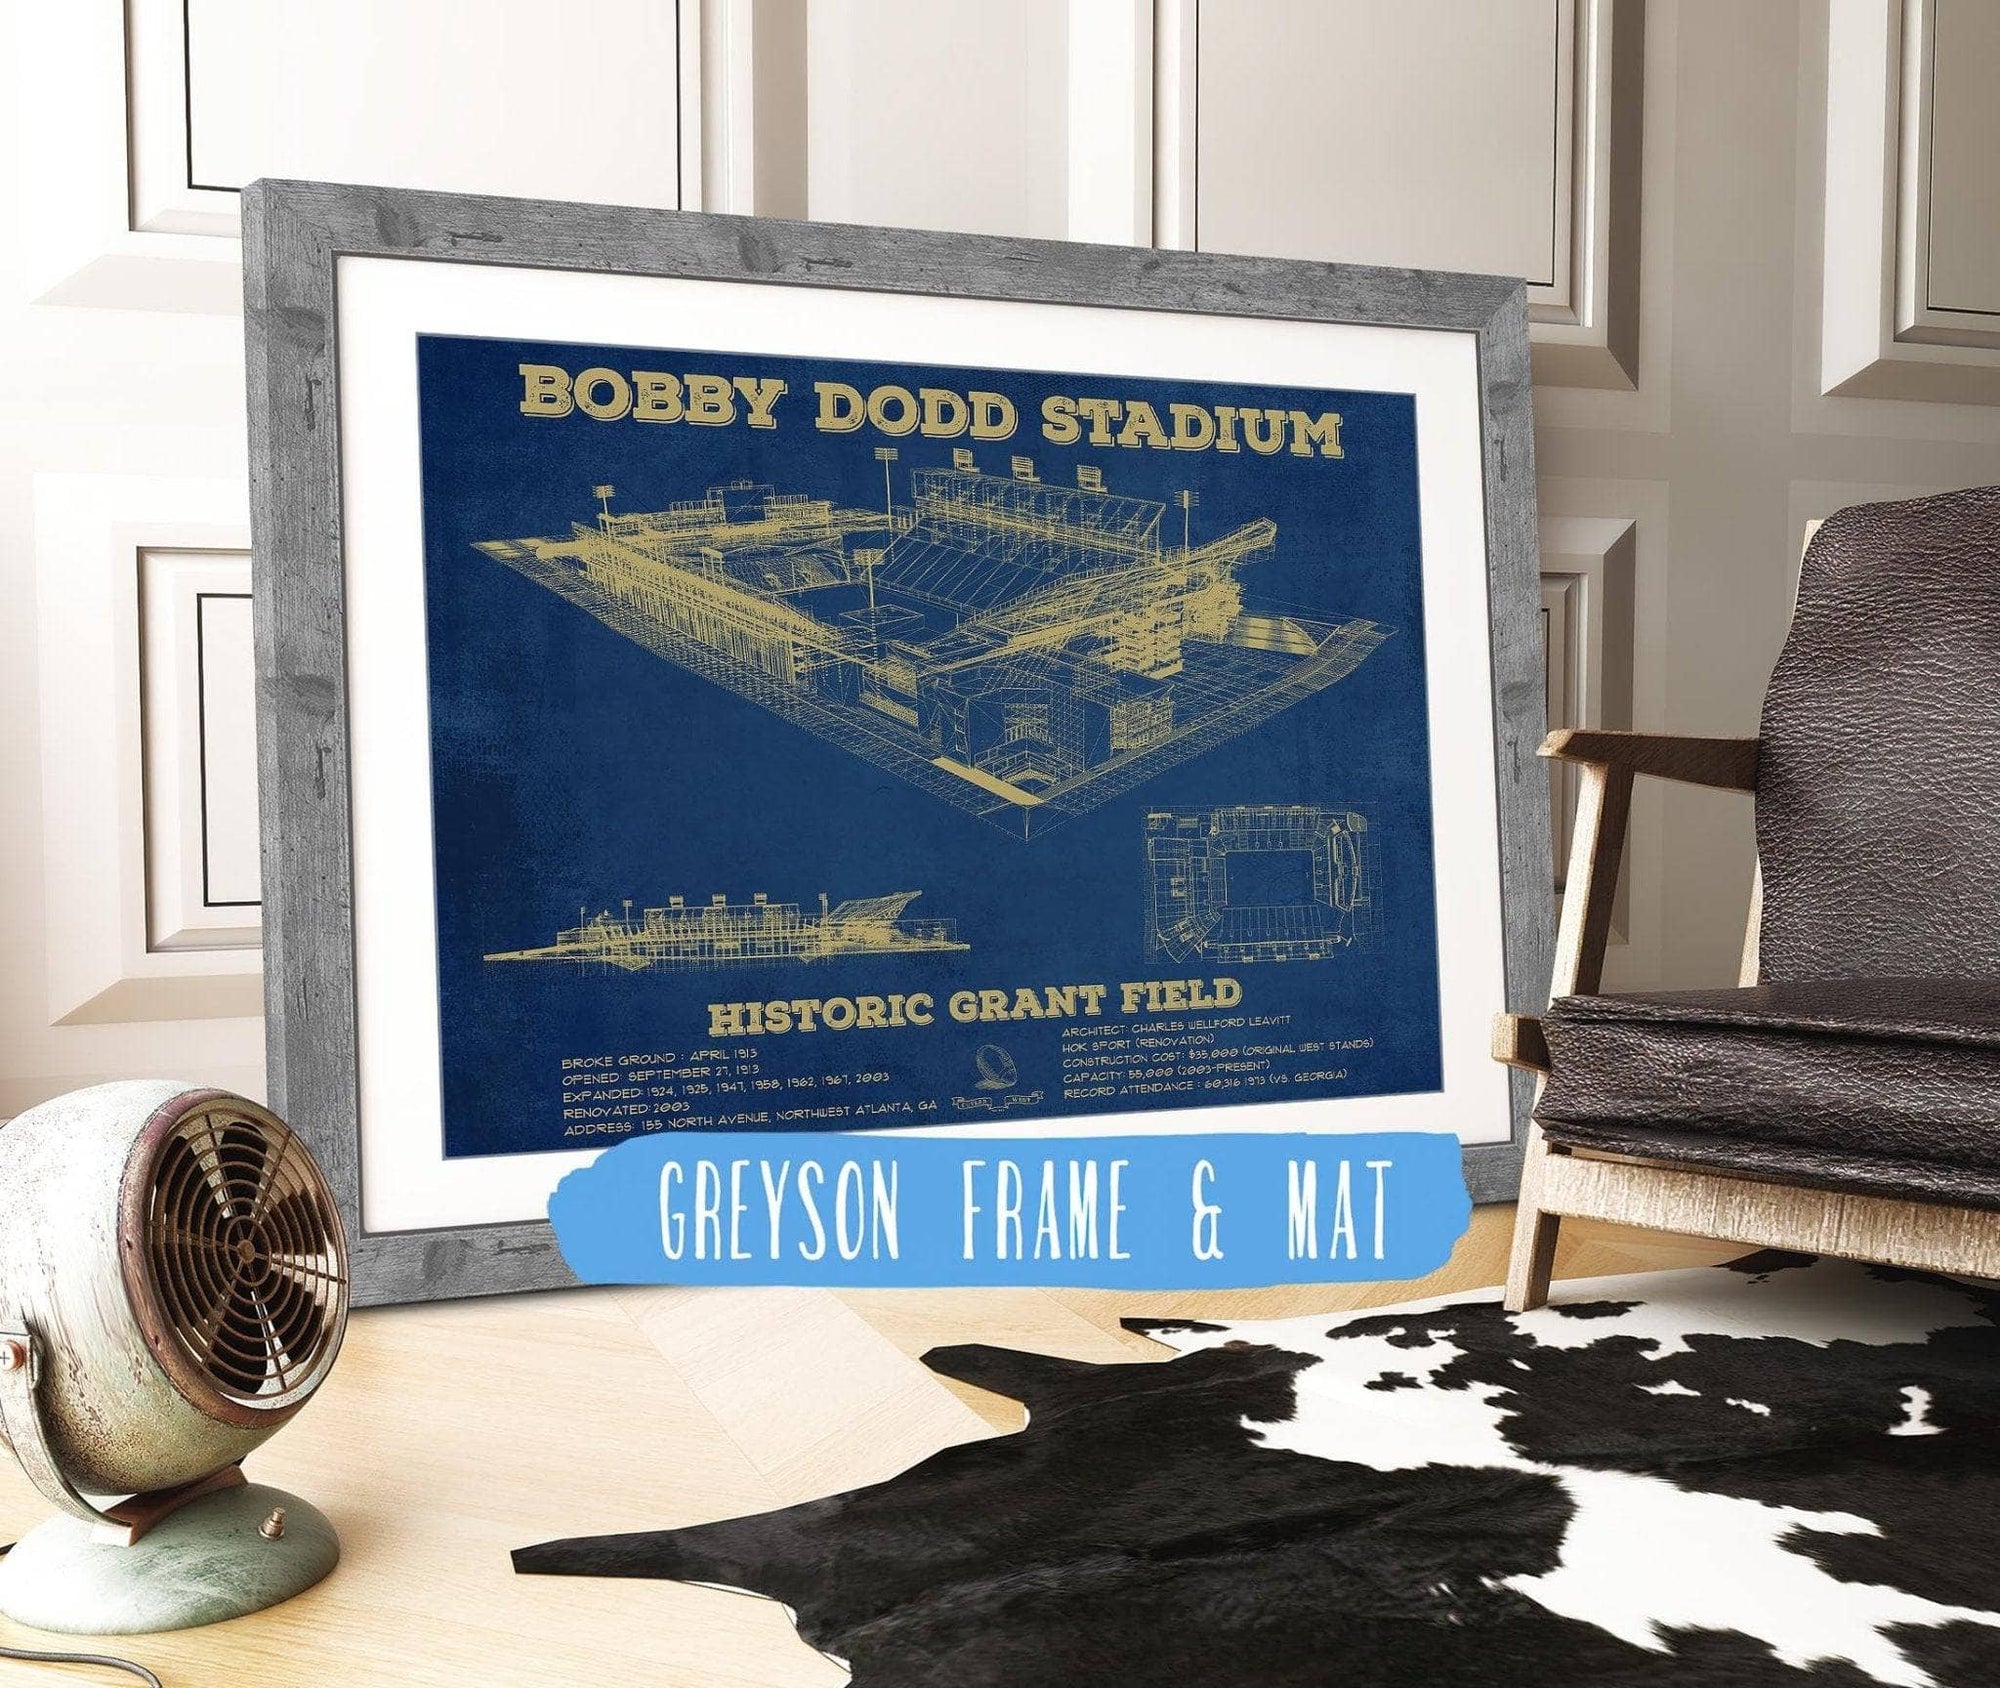 Cutler West College Football Collection 14" x 11" / Greyson Frame & Mat Georgia Tech Yellow Jackets - Bobby Dodd Stadium at Historic Grant Field 835000126_48679